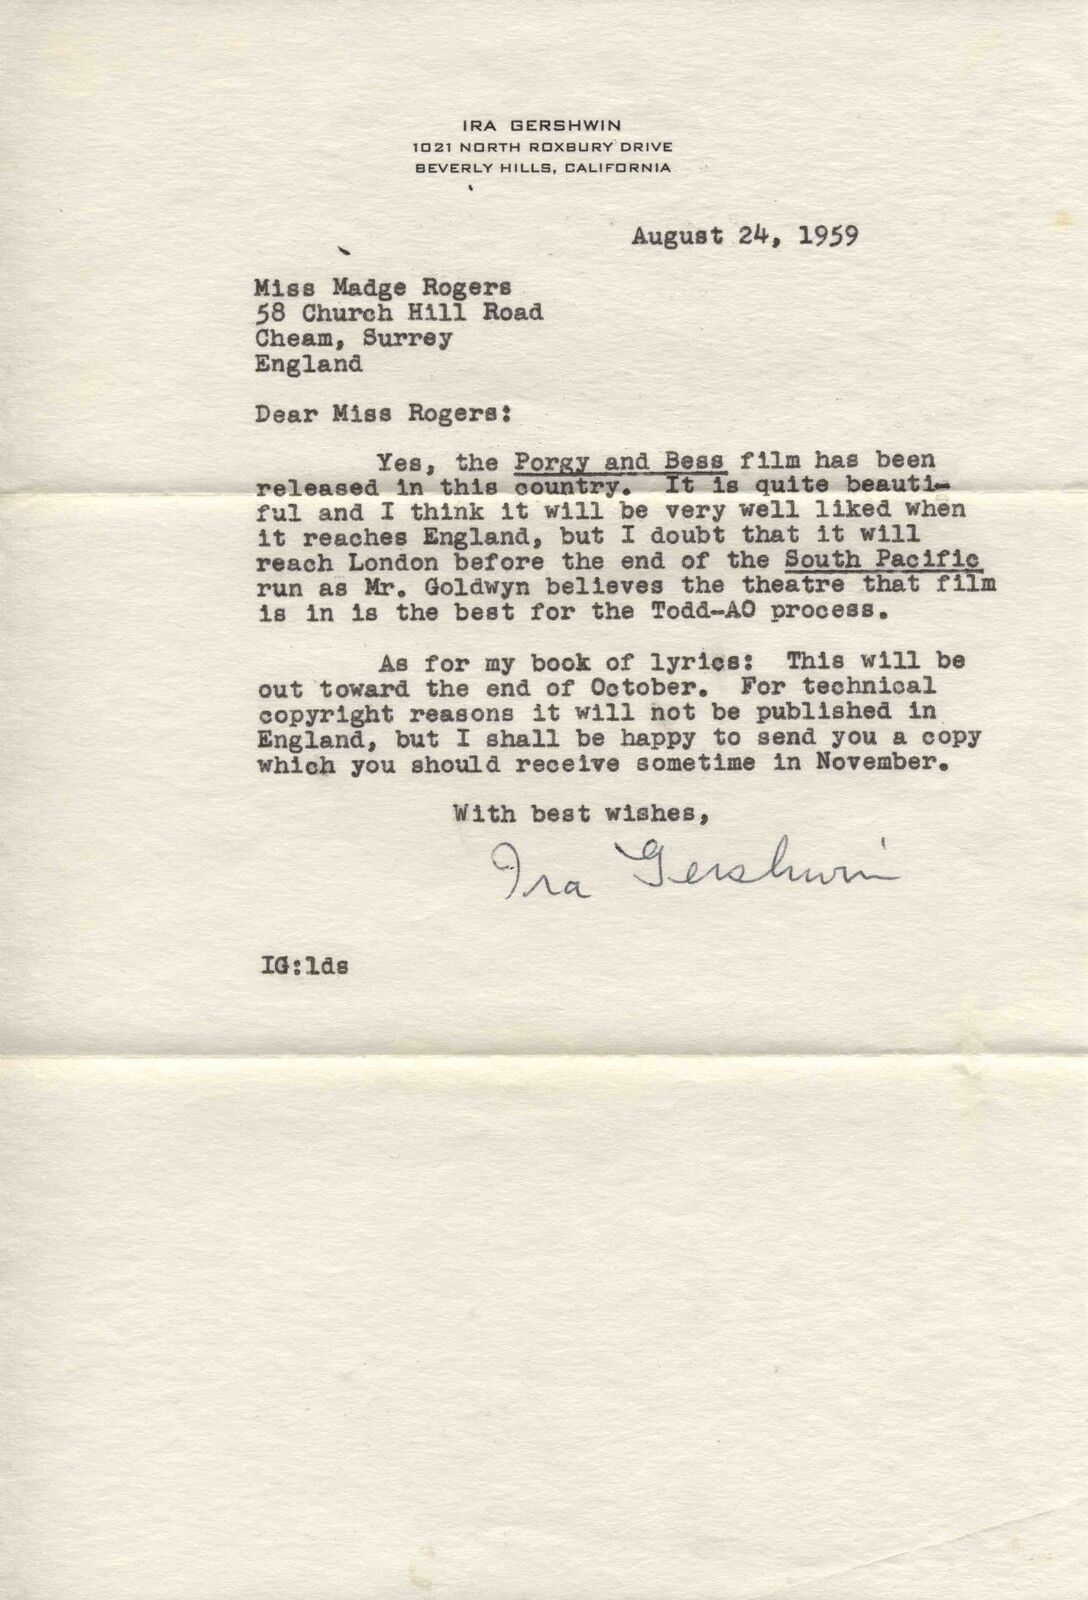 IRA GERSHWIN Autographed Signed LETTER South Pacific Porgy and Bess Lyricist